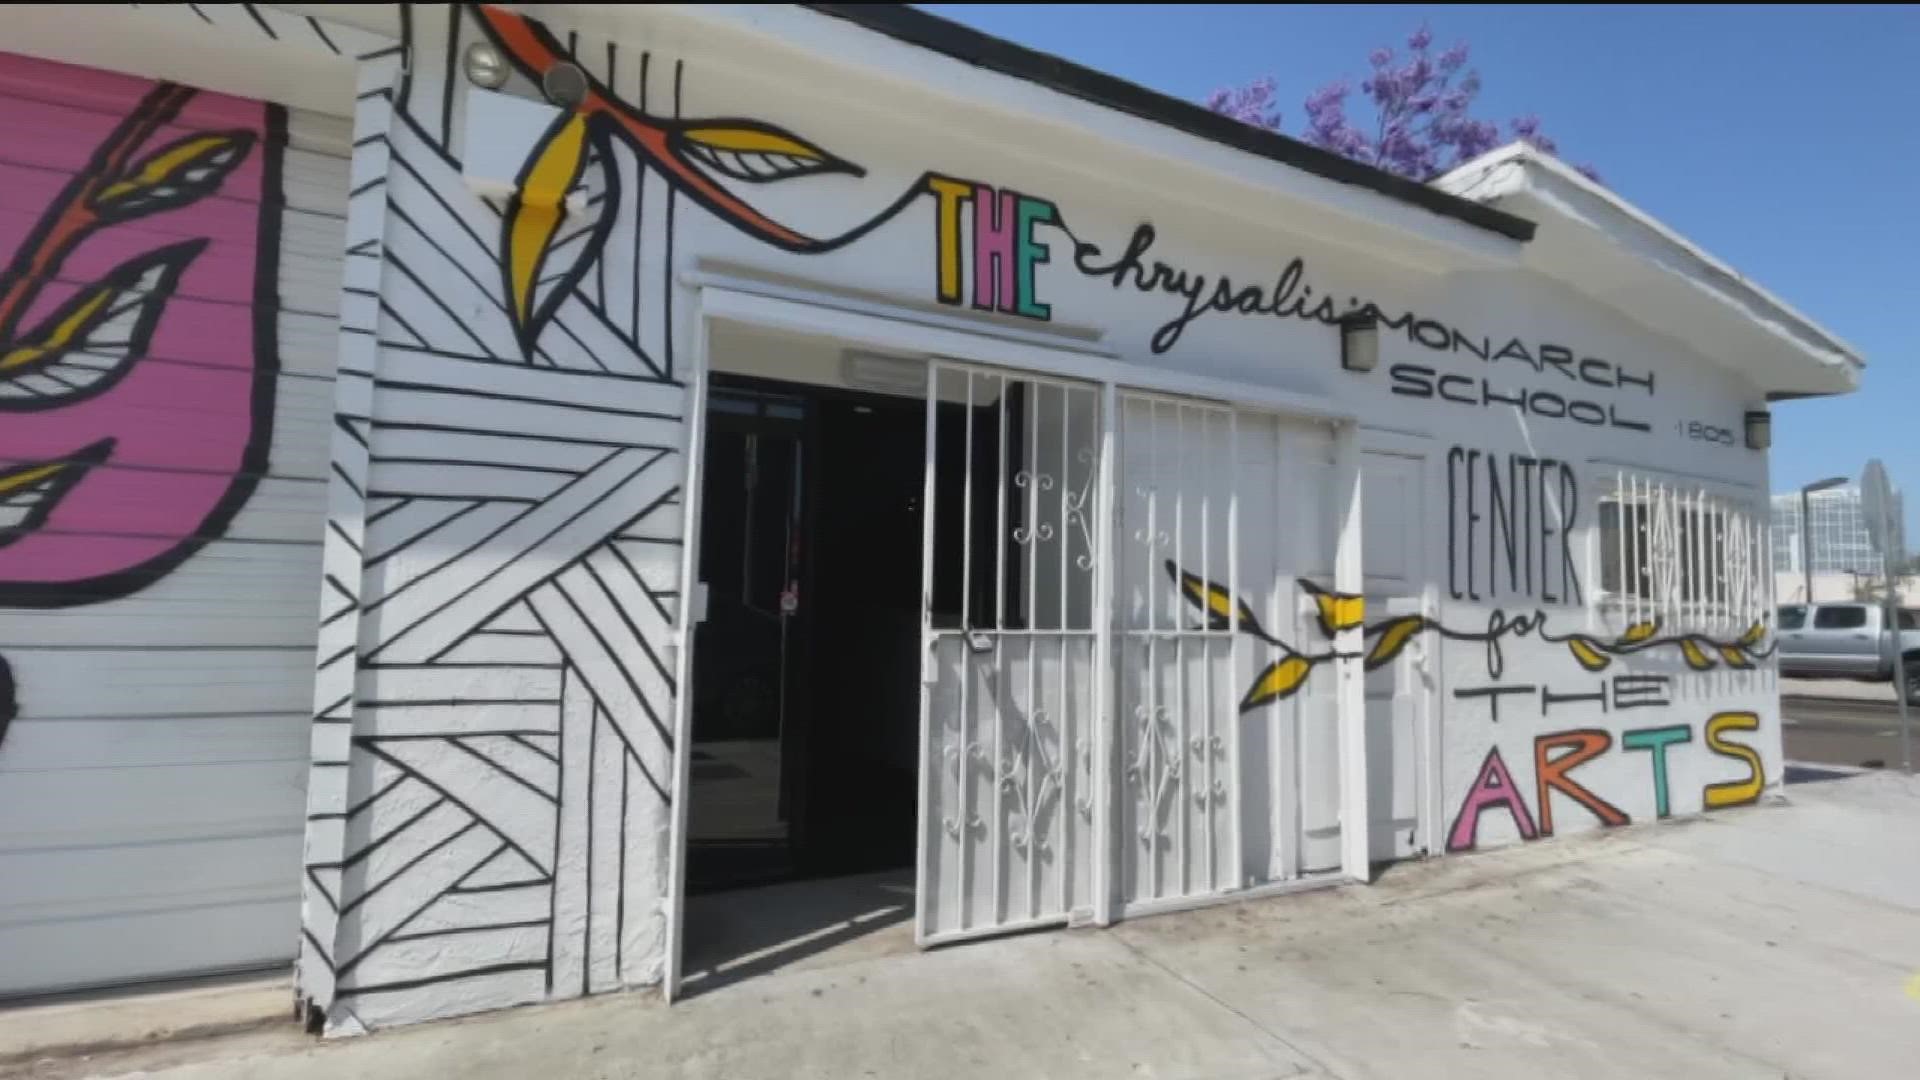 The Monarch School opened a new arts center that will be used for performances, music and to exhibit art.